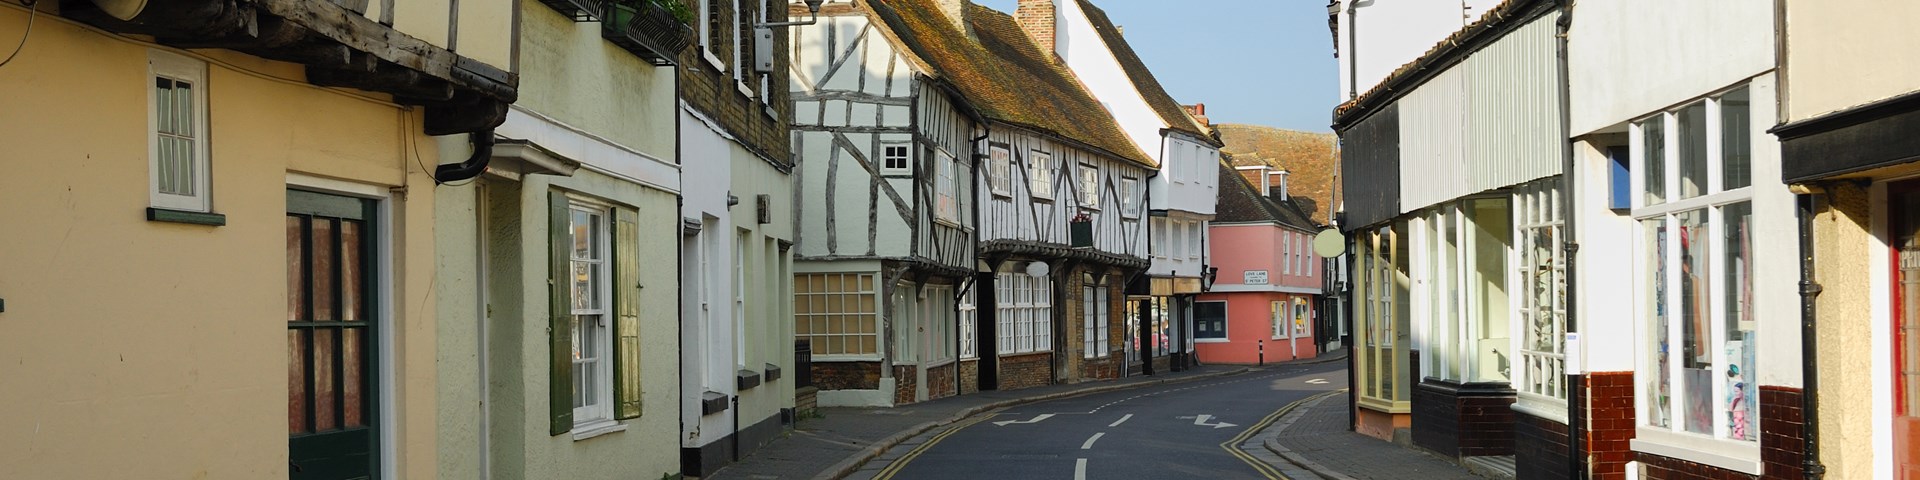 Old street with traditional buildings, Sandwich, Kent image